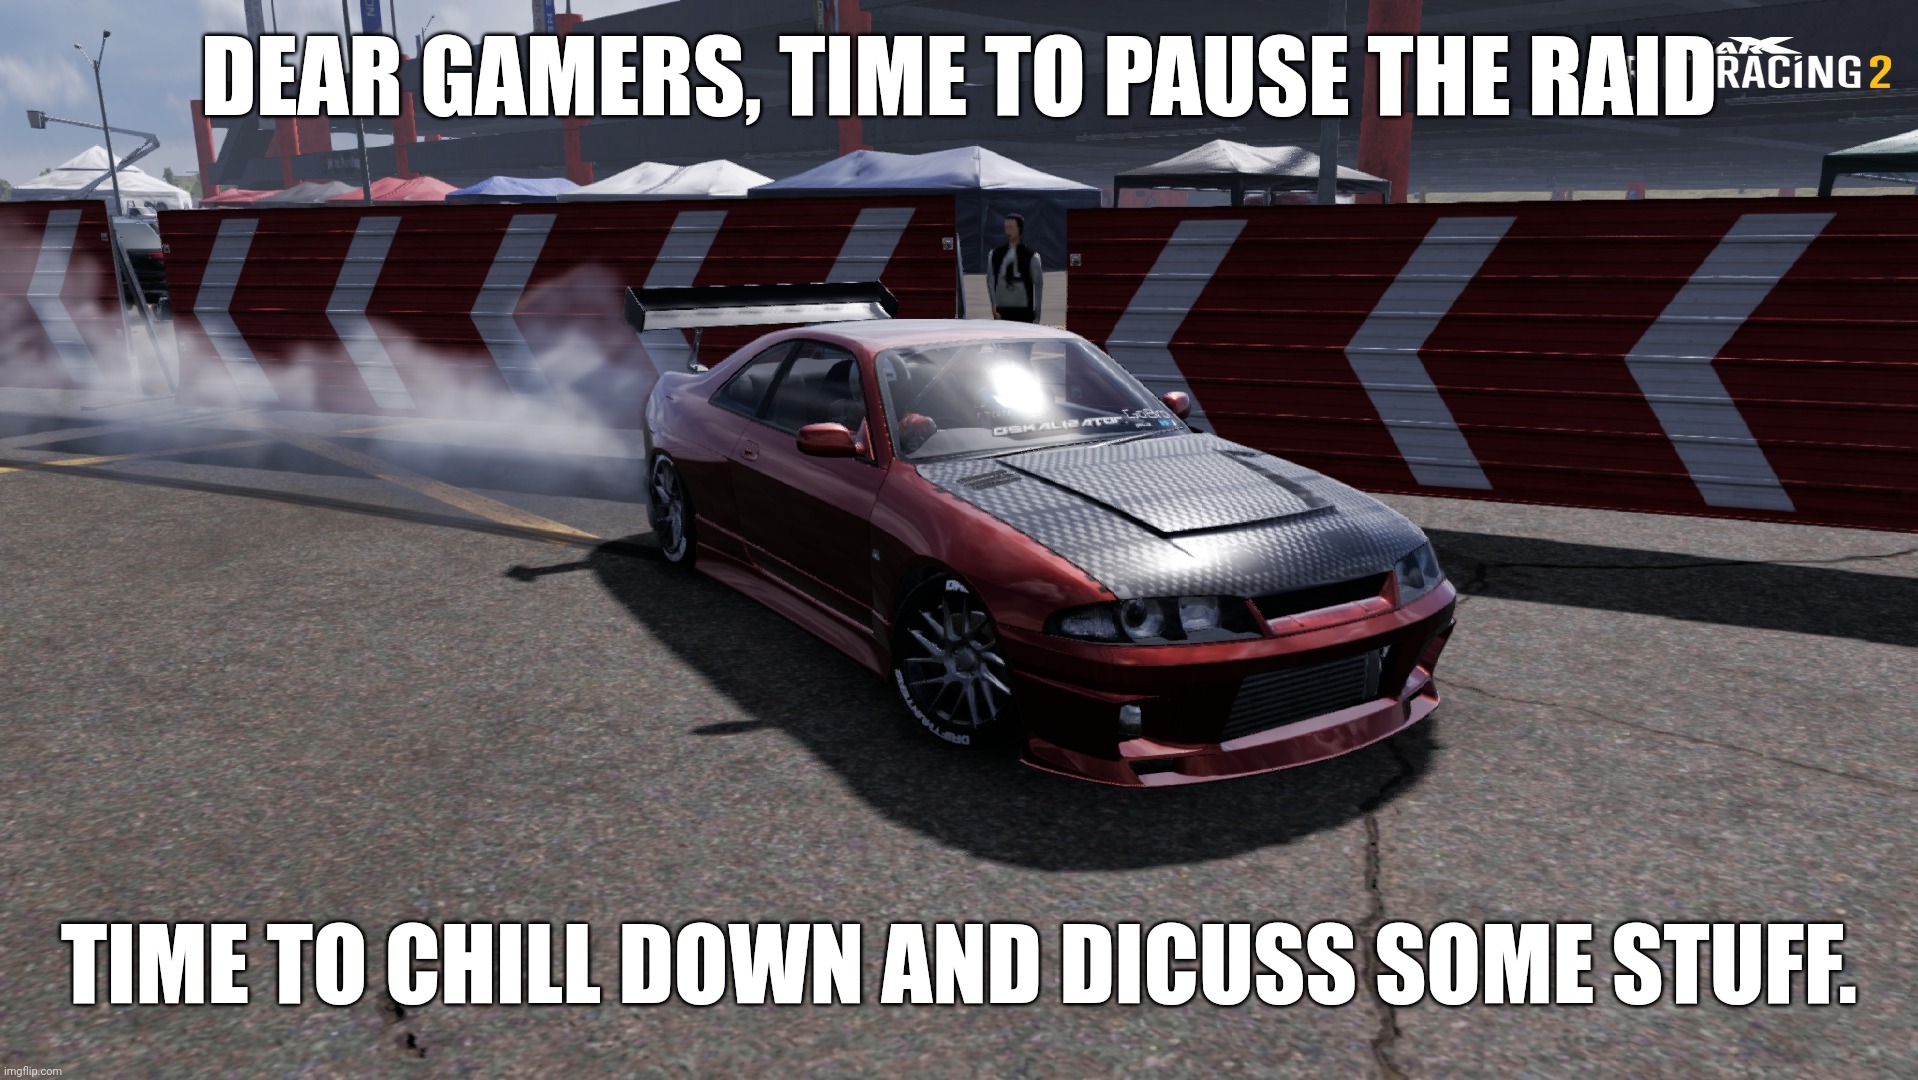 Nissan Skyline R33 | DEAR GAMERS, TIME TO PAUSE THE RAID; TIME TO CHILL DOWN AND DICUSS SOME STUFF. | image tagged in nissan skyline r33 | made w/ Imgflip meme maker